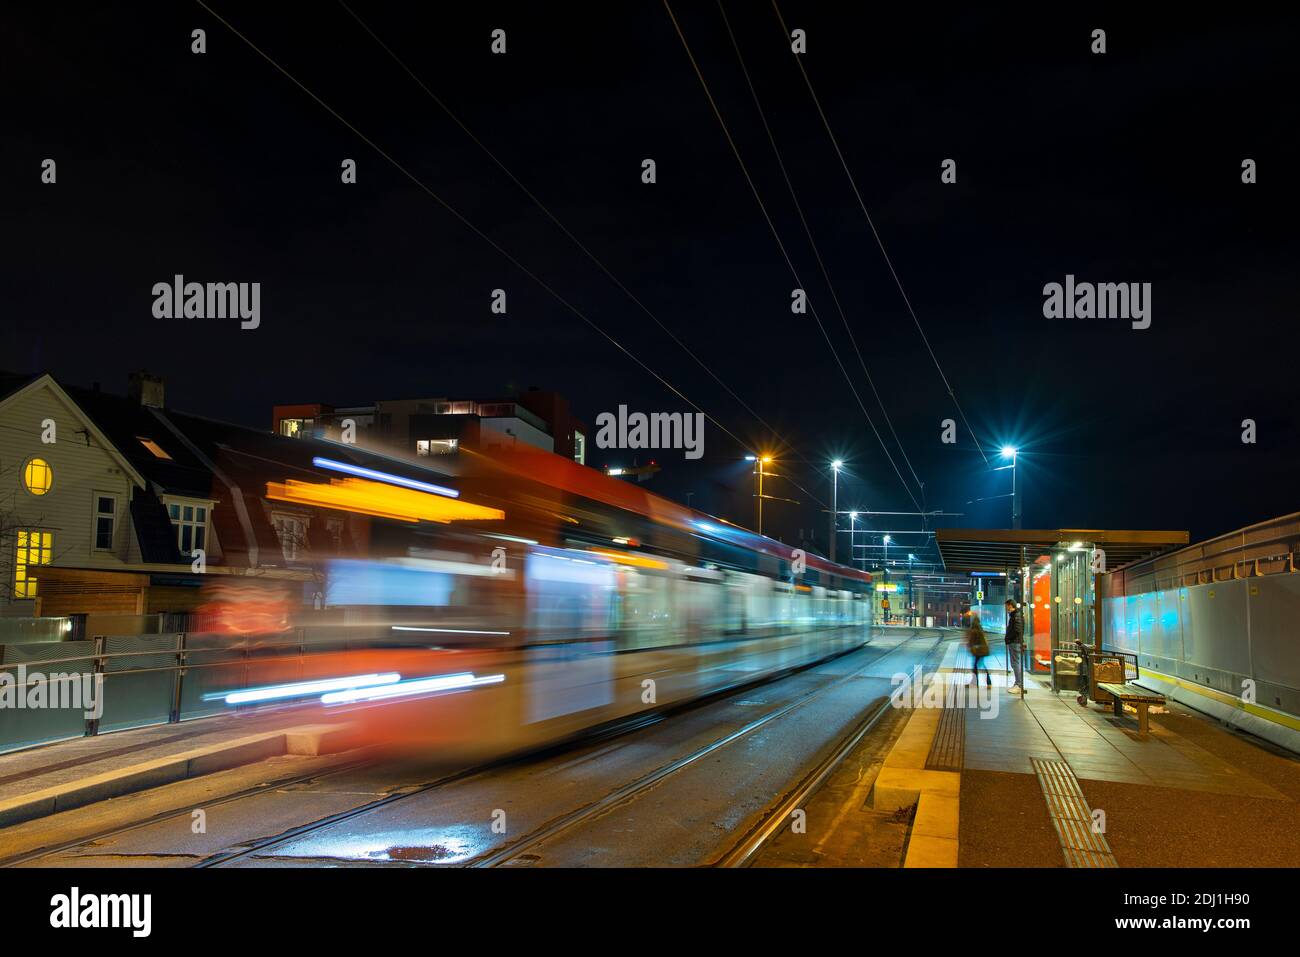 Tram passing a station in the night leaving a trail of light. Stock Photo